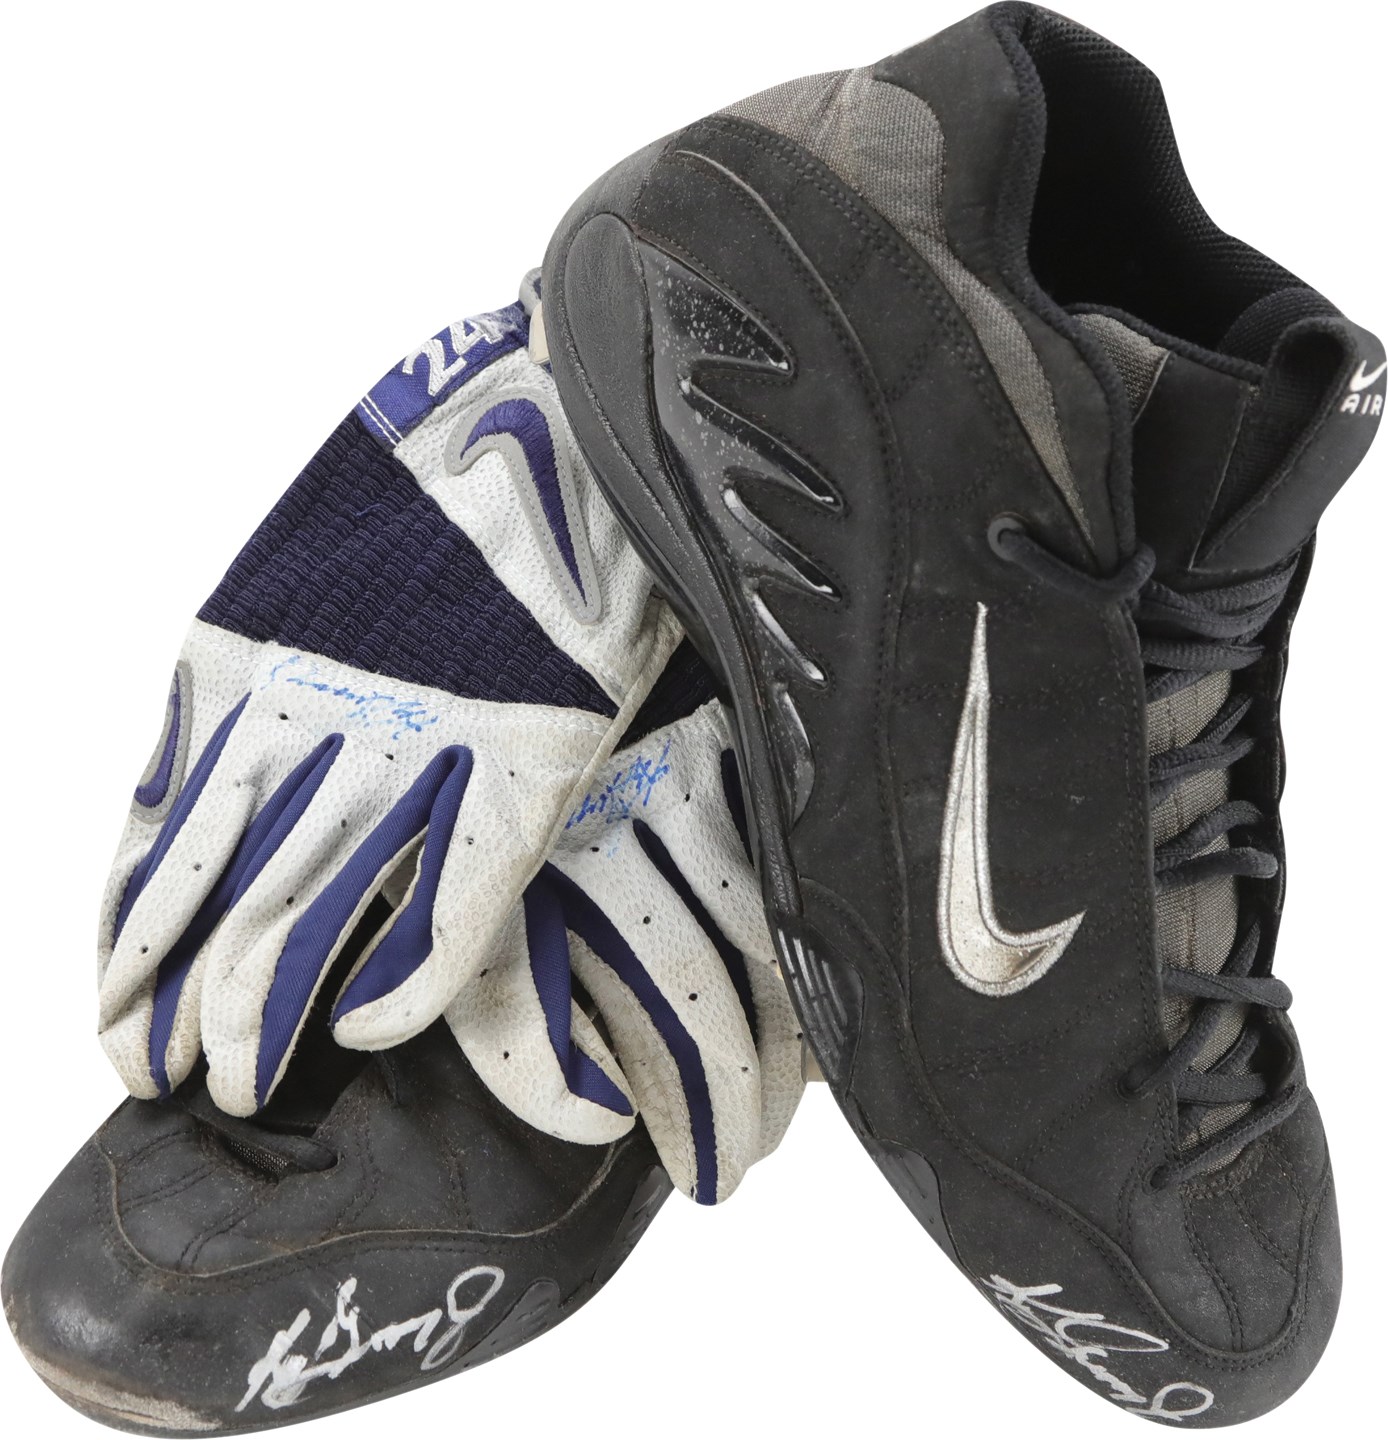 Baseball Equipment - 1998-99 Ken Griffey Jr. Seattle Mariners Signed Game Used Cleats & Batting Gloves (Griffey Jr. COA)